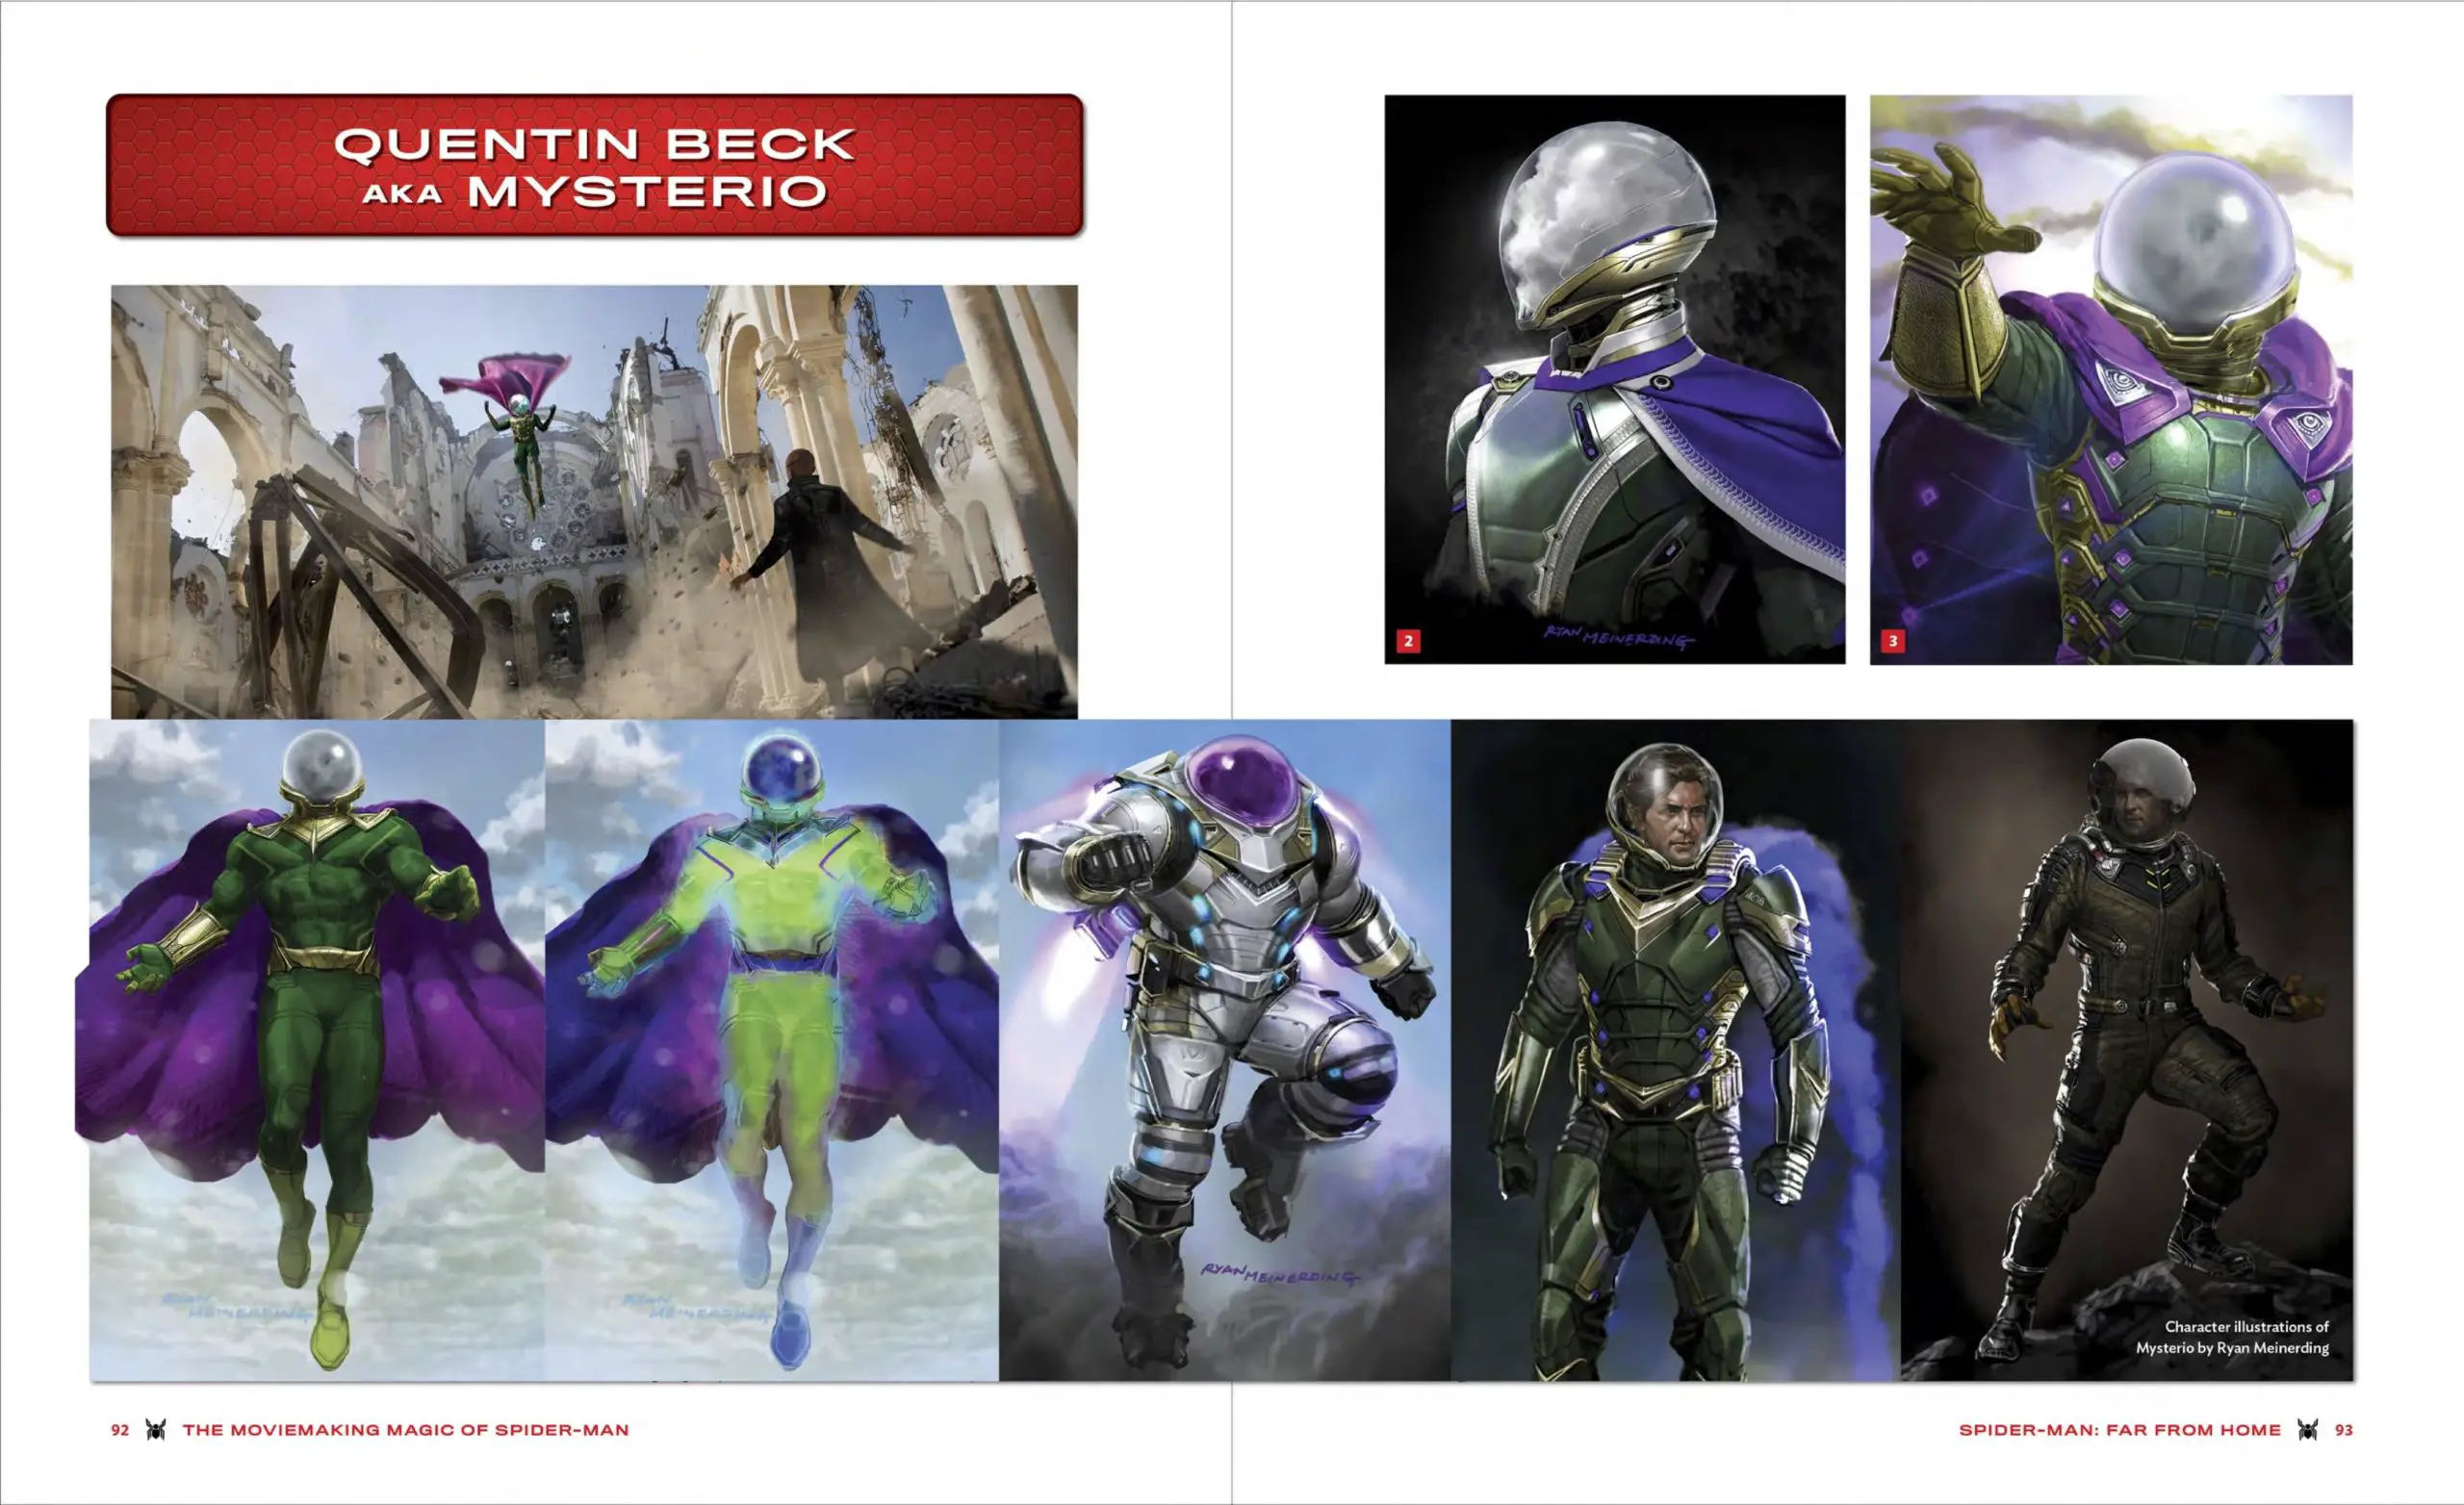 Mysterio in The Moviemaking Magic of Marvel Studios: Spider-Man 